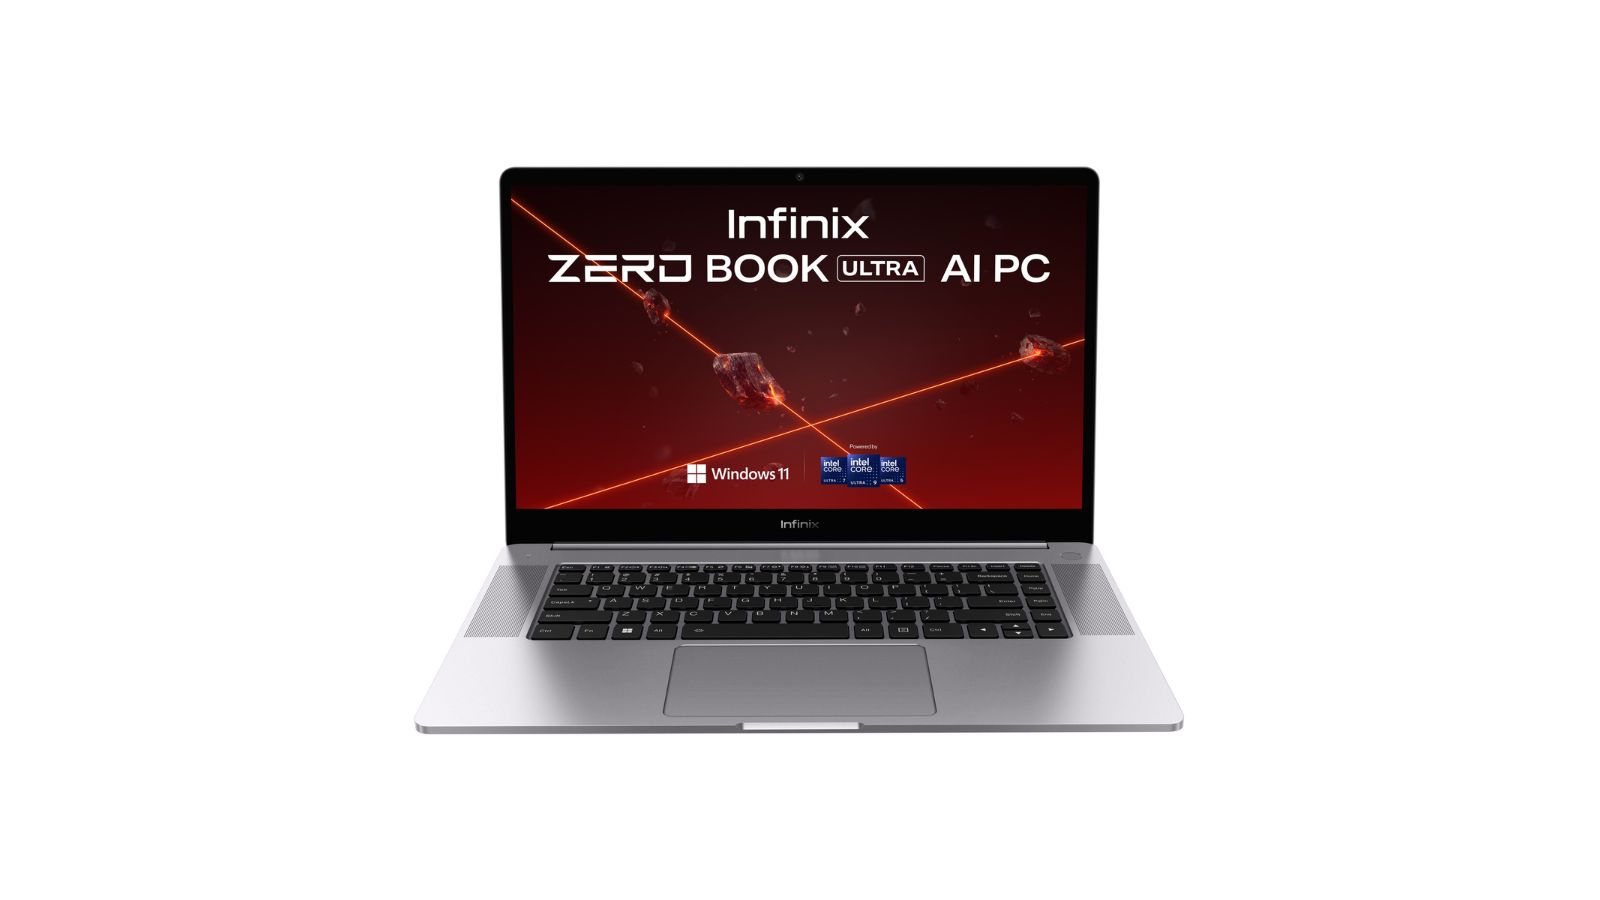 Infinix launches Zero Book Ultra AI PC with Intel Core Ultra processor, starting at Rs 59,990 | Technology News